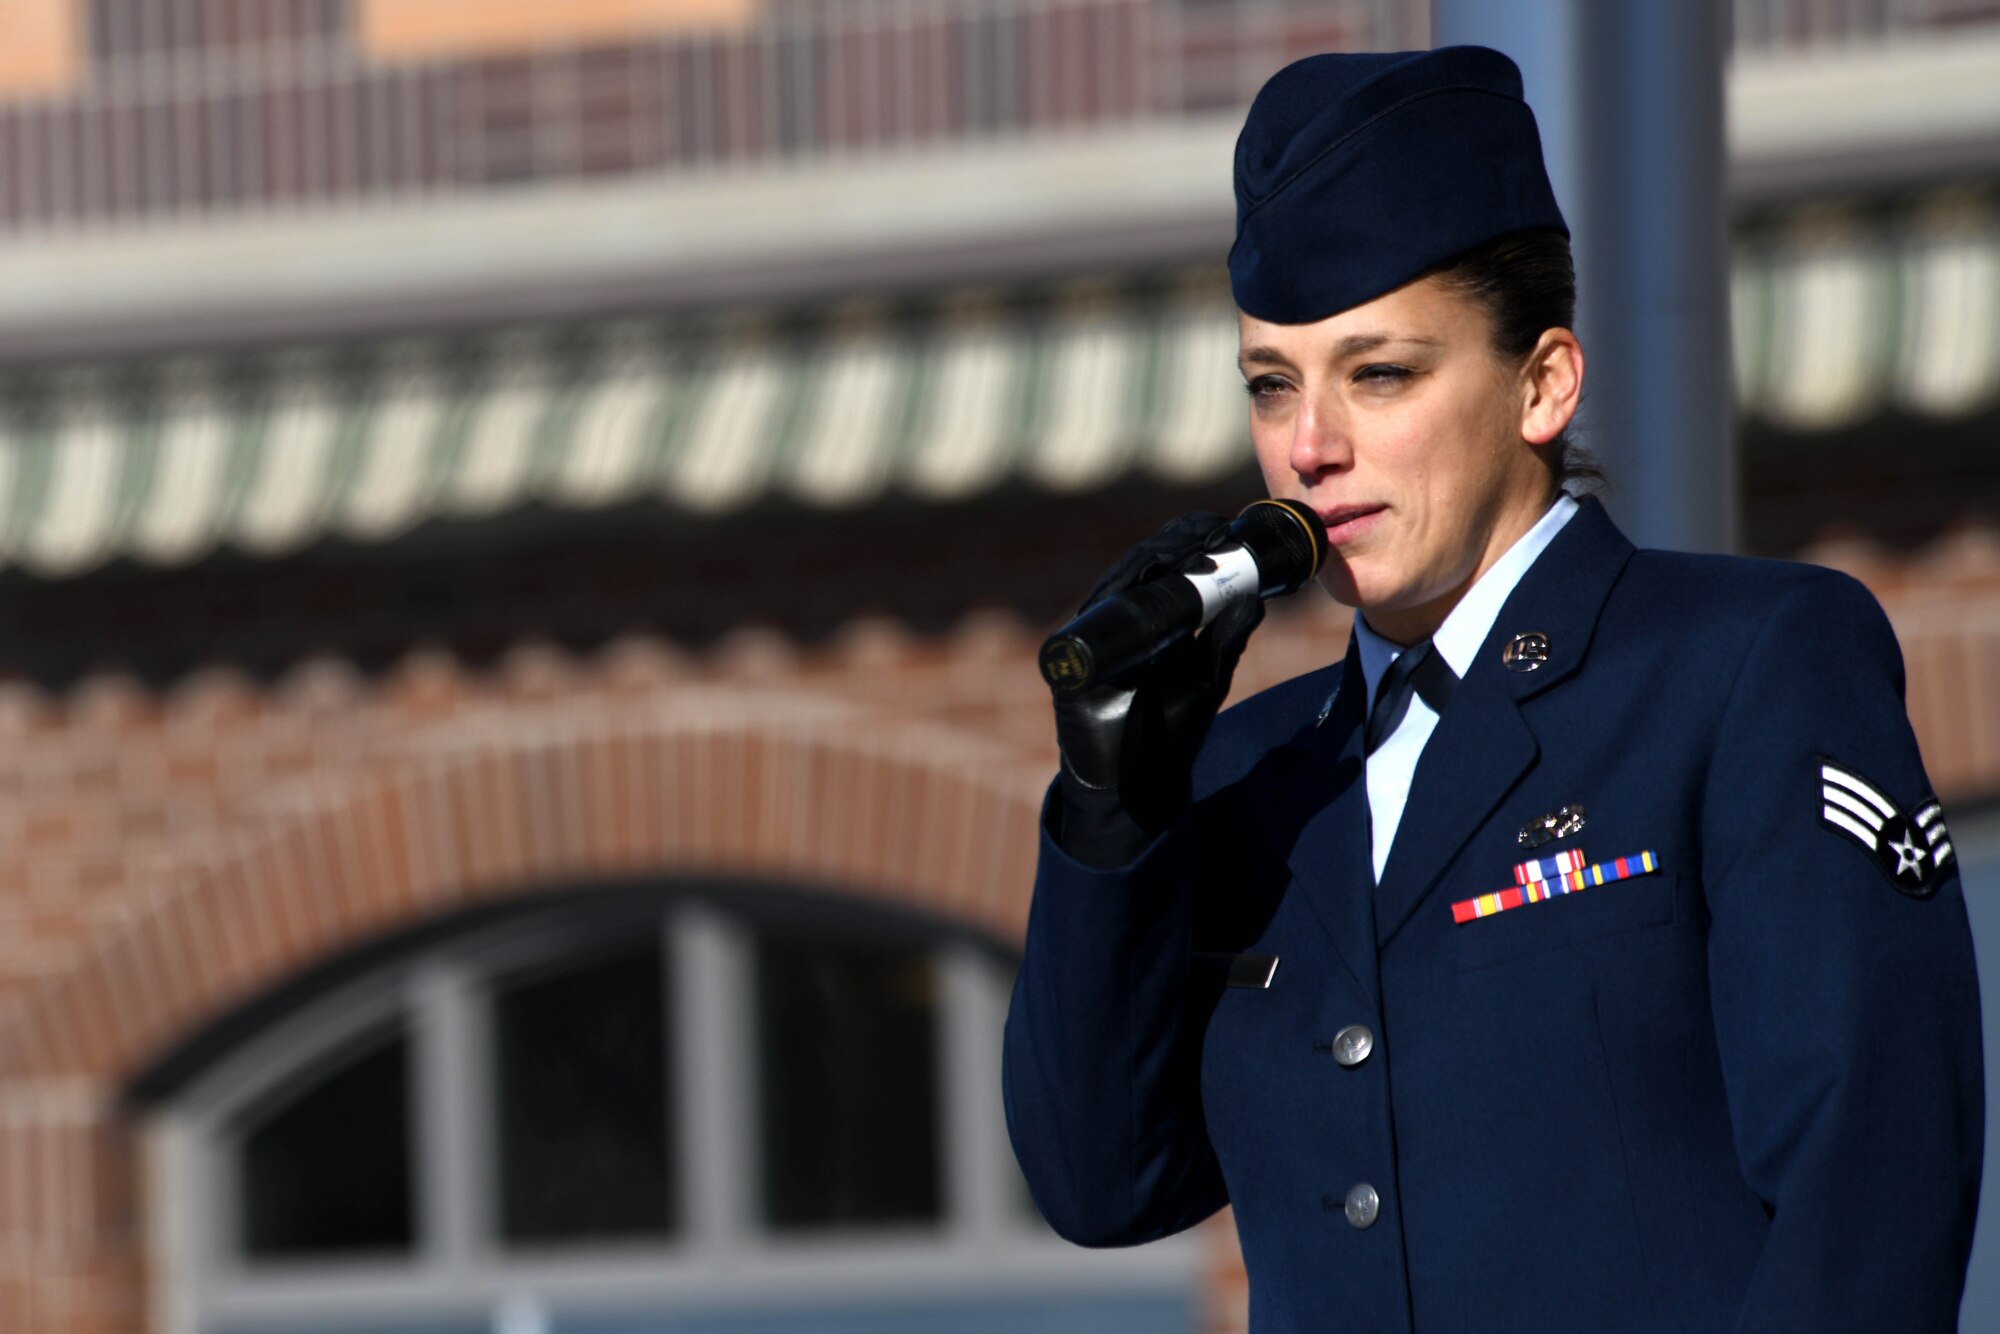 Senior Airman Rachael Karpo, 28th Operations Support Squadron Air Traffic Controller, speaks at the 2019 Veteran’s Day Ceremony at Main Street Square in Rapid City, S.D., Nov. 11, 2019. Karpo sang the National Anthem as an opener for the ceremony and provided an anecdote of her military service to those in attendance. (U.S. Air Force photo by Staff Sgt. Hailey Staker)